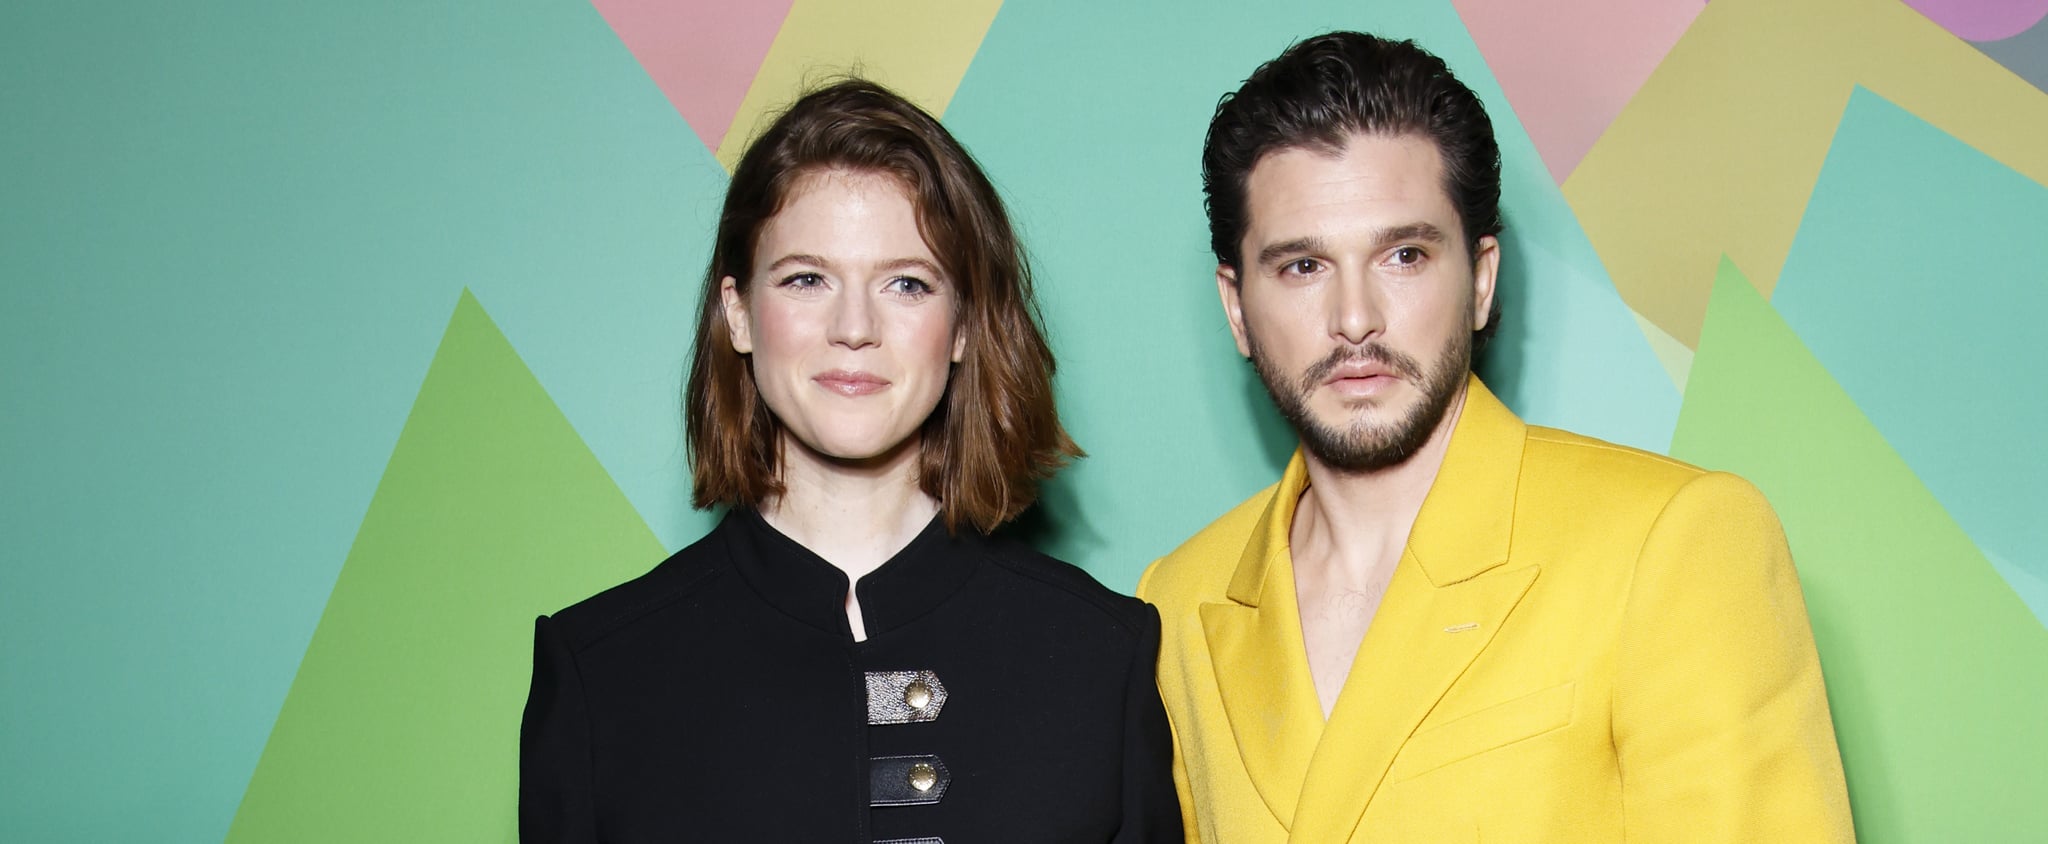 Kit Harington and Rose Leslie Are Expecting Baby #2